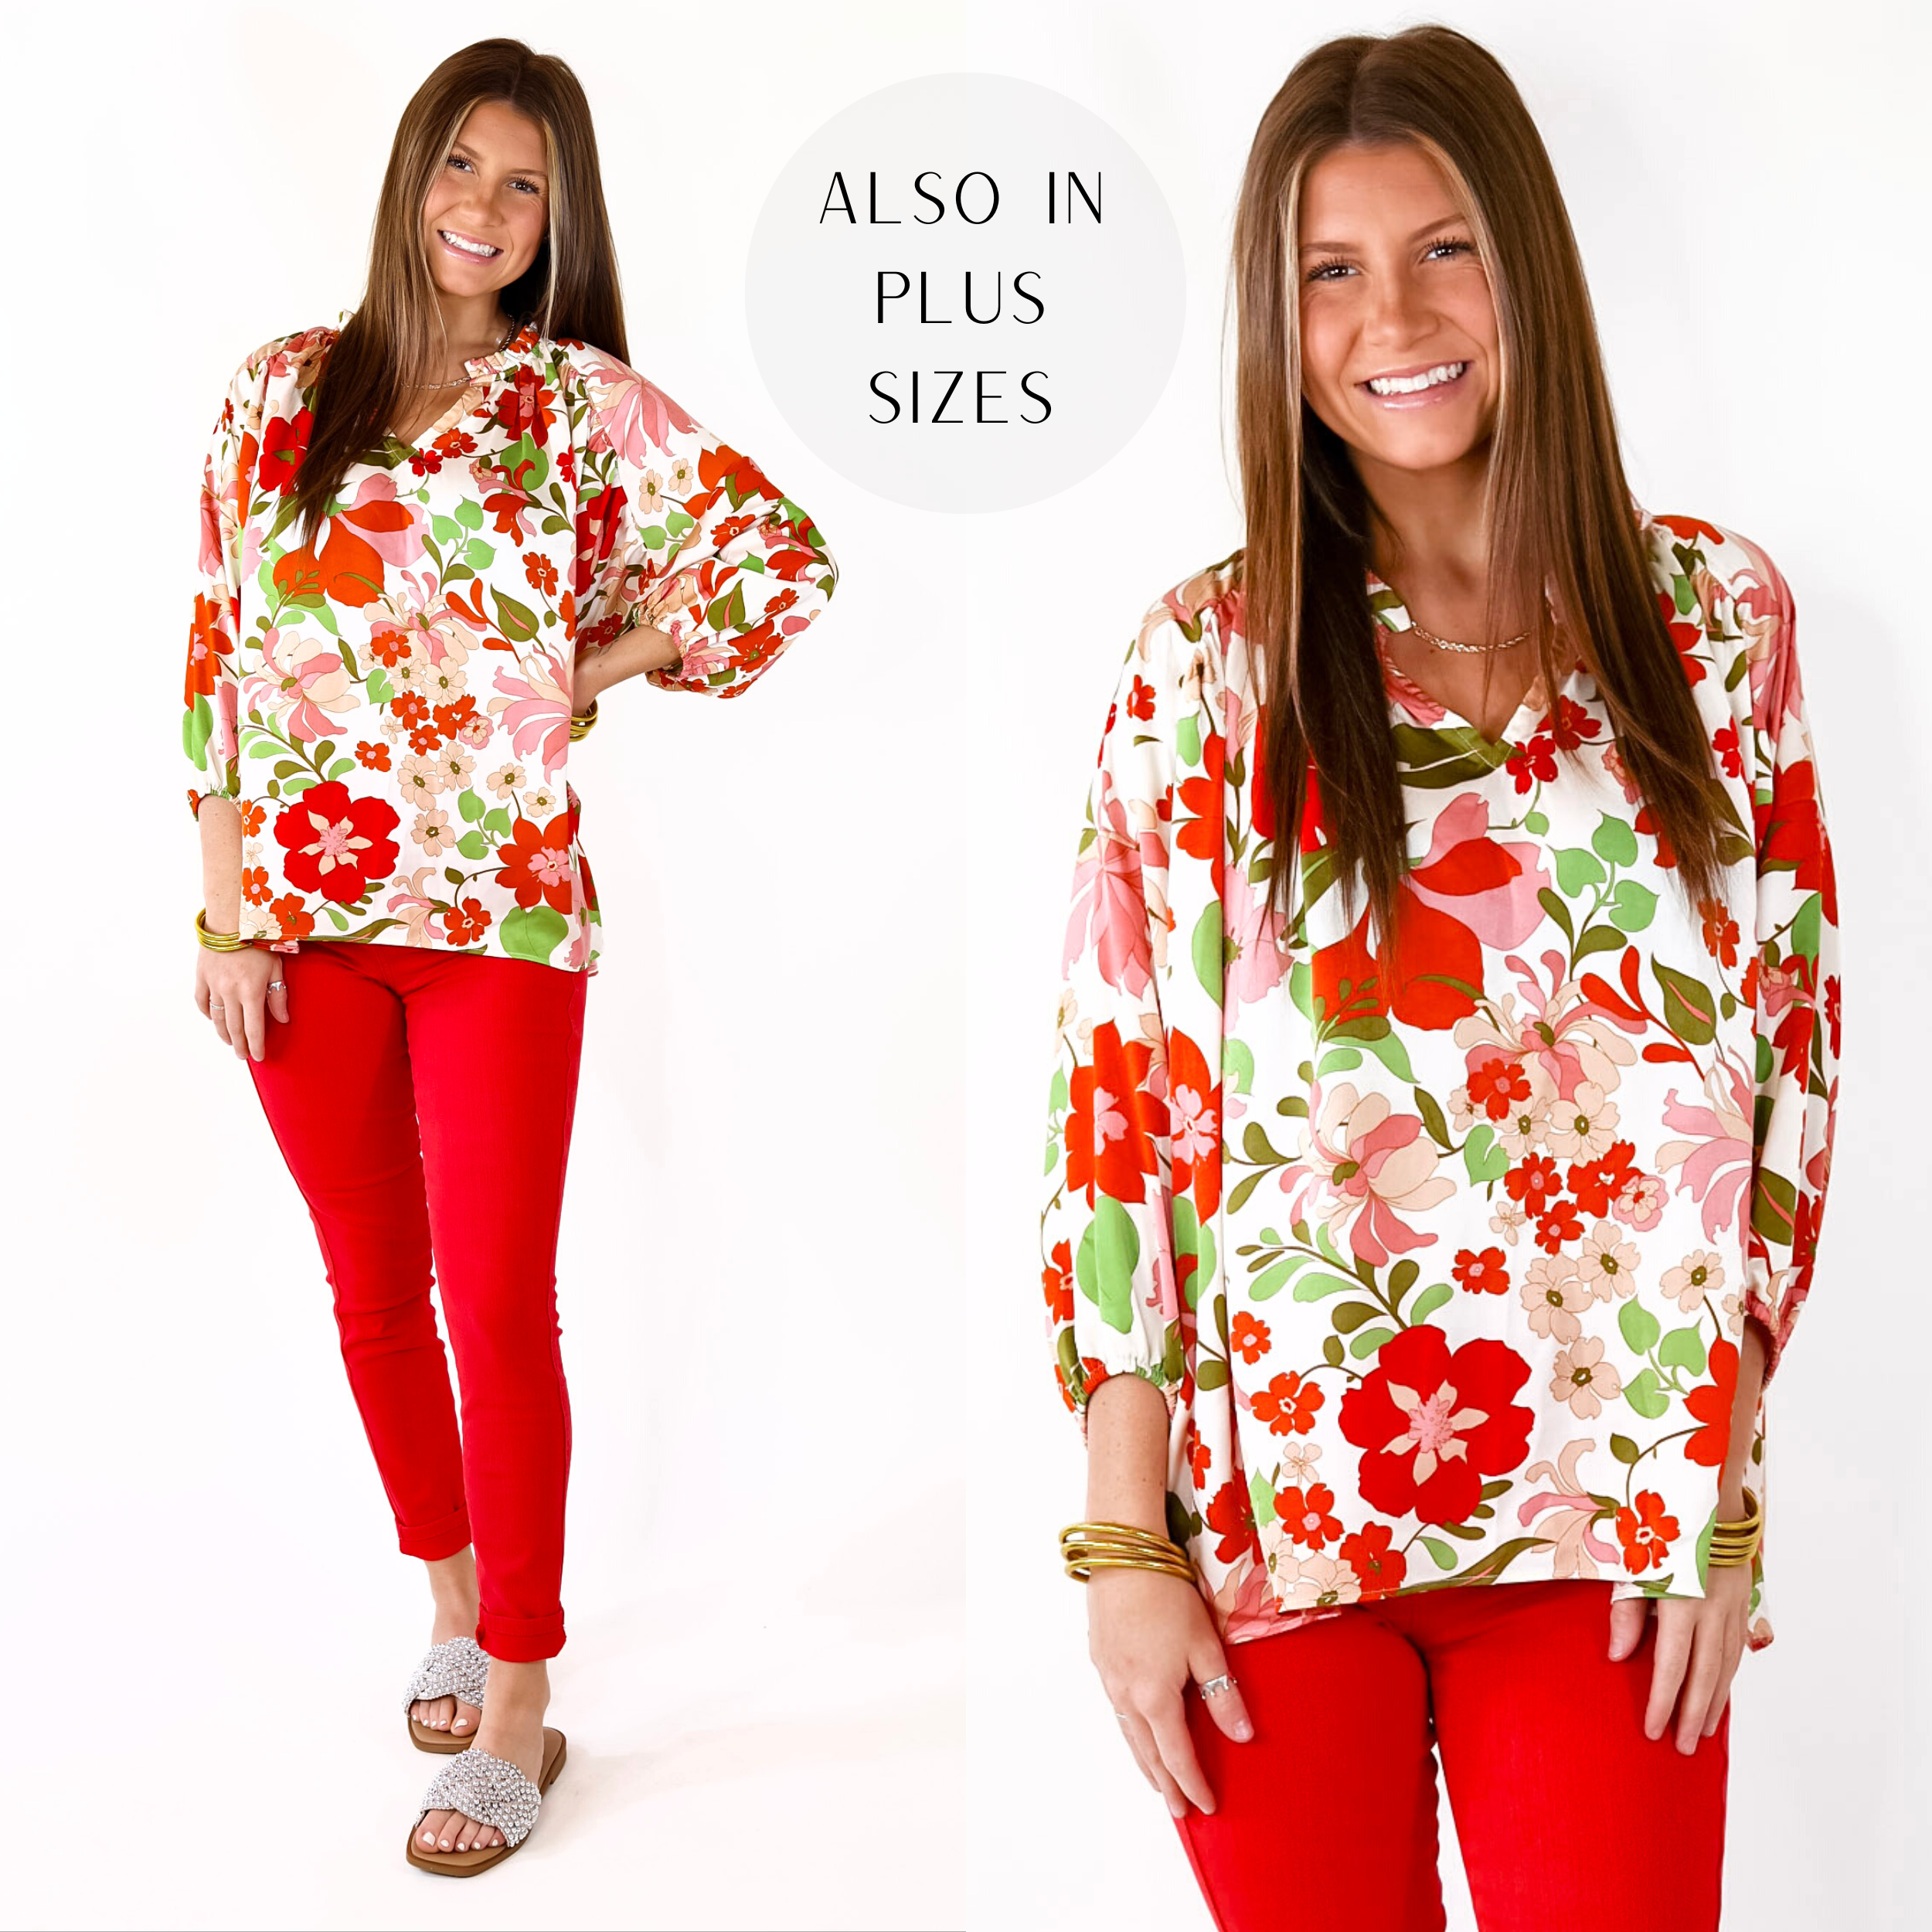 Falling For Floral 3/4 Sleeve Top with Notched Neck in White - Giddy Up Glamour Boutique